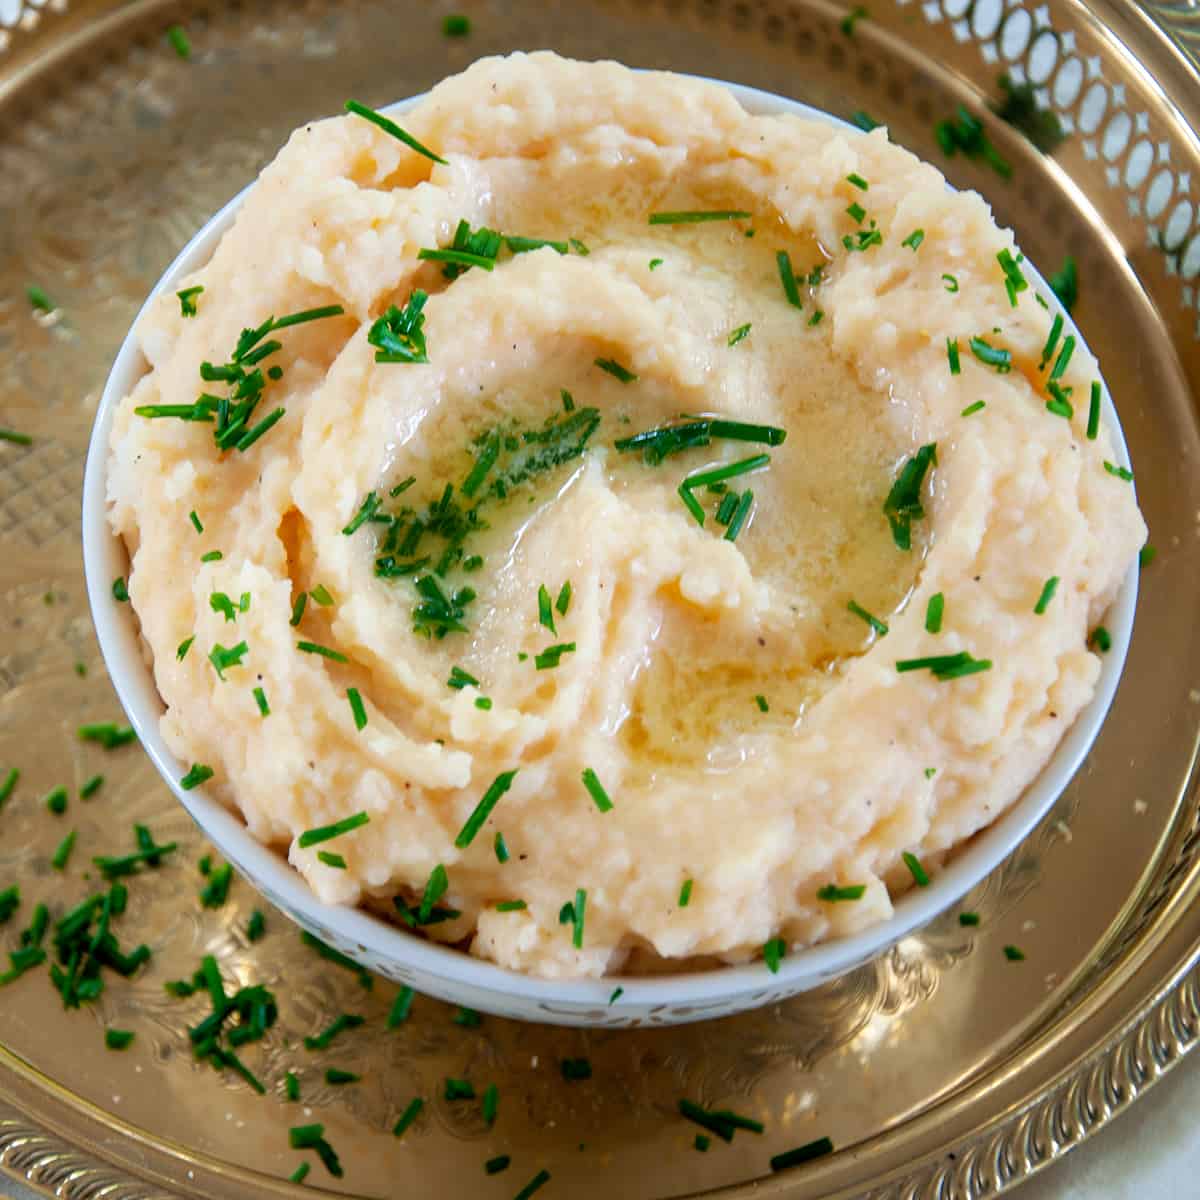 Bowl of Cheesy Mashed Potatoes in a white bowl that is sitting on a platter and chopped chive sprinkled all over.